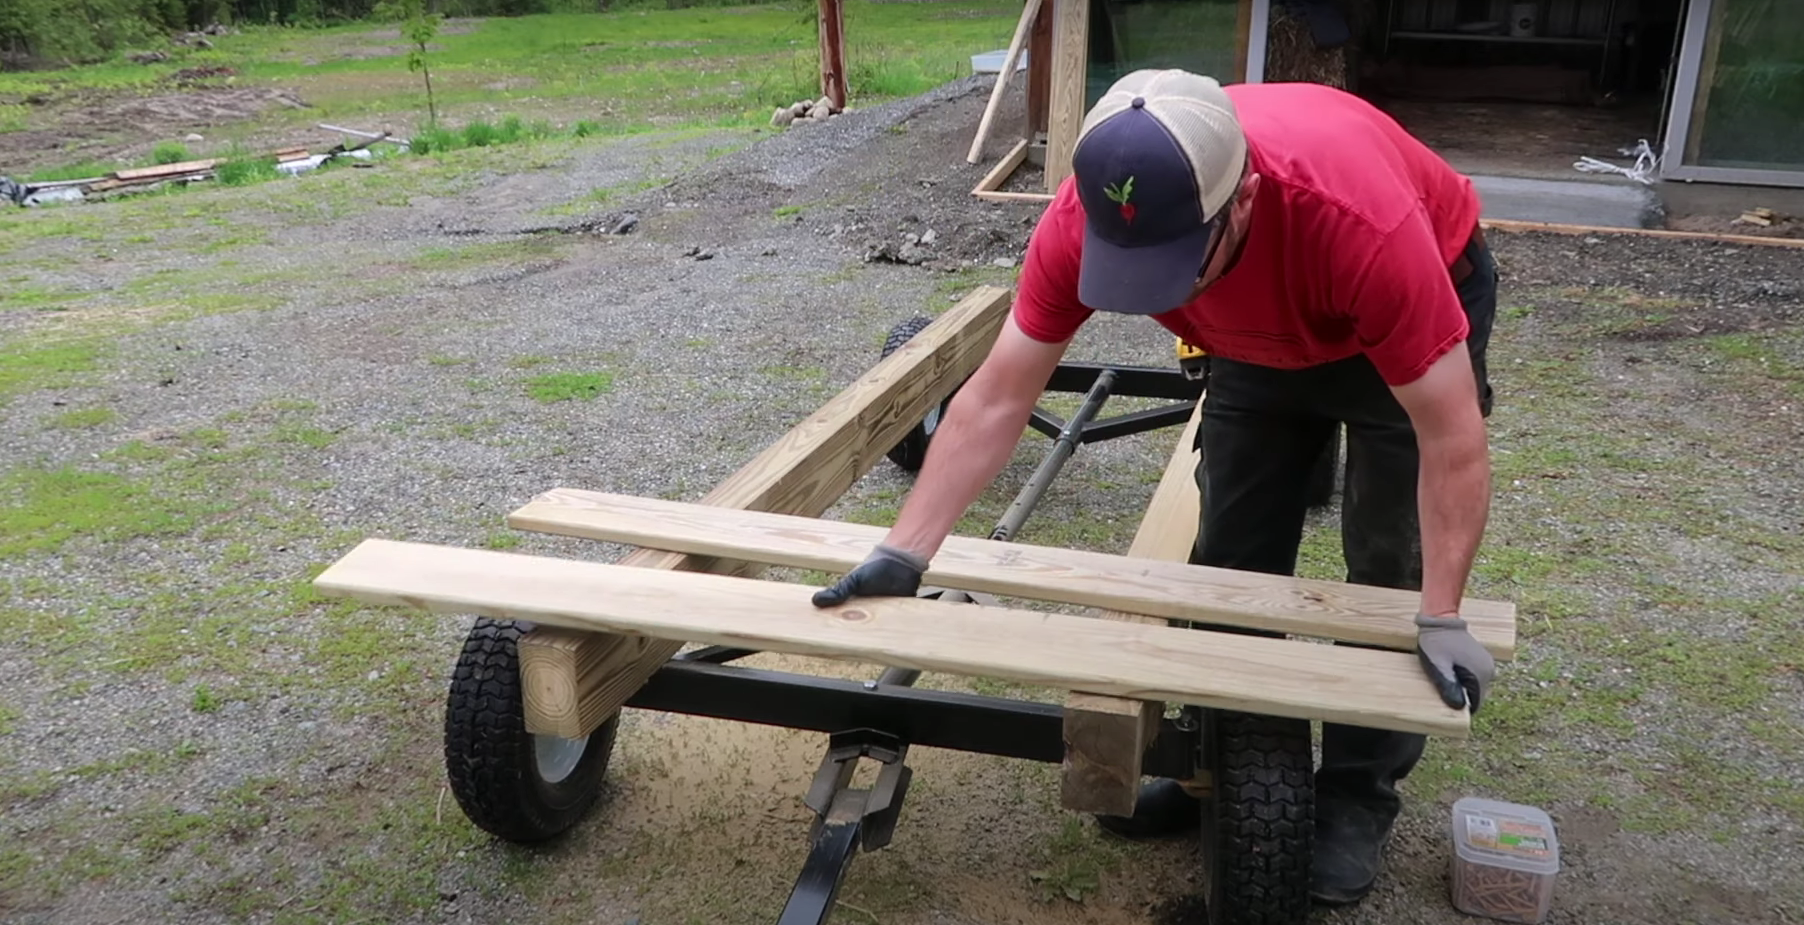 How to Build a Utility Wagon in 6 Easy Steps